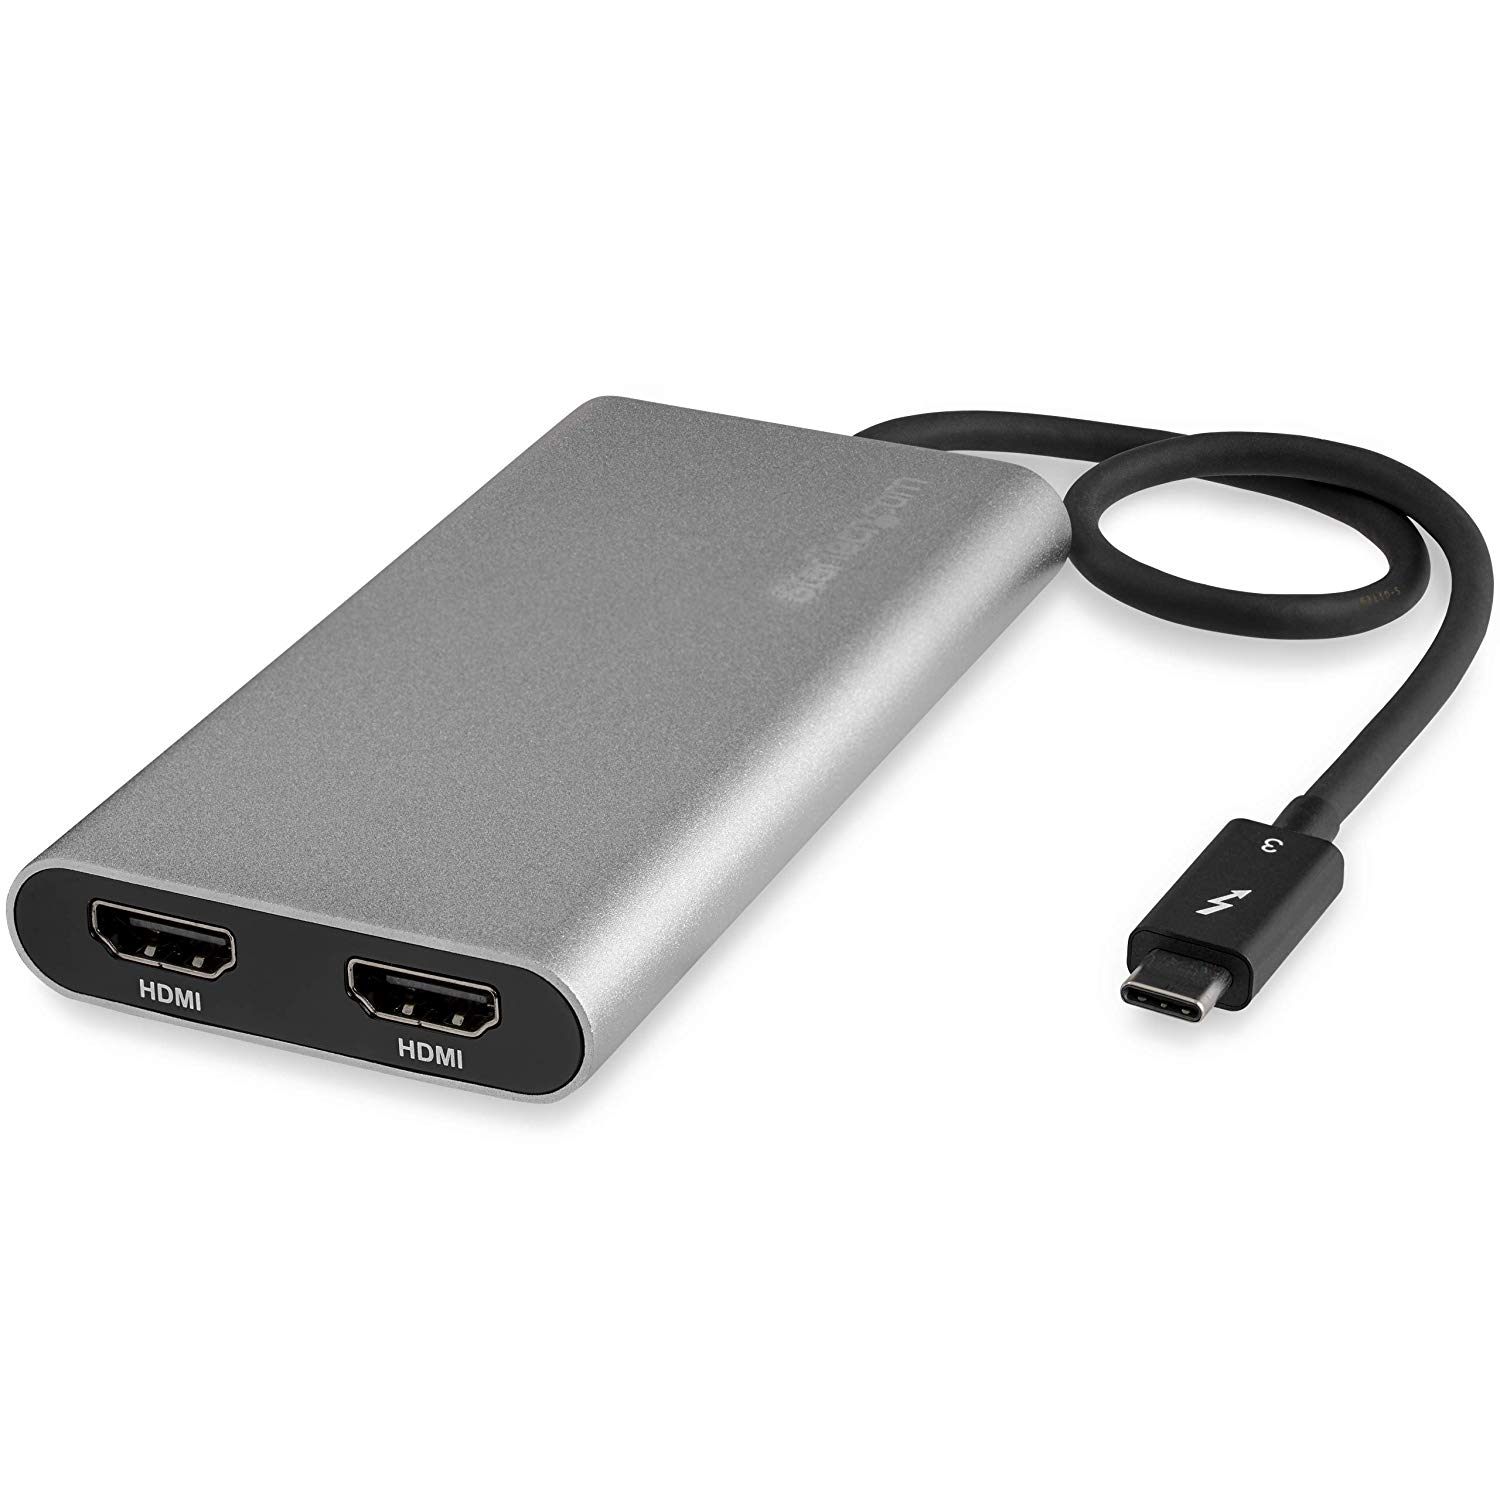 thunderbolt 3 to dual hdmi 2.0 adapter